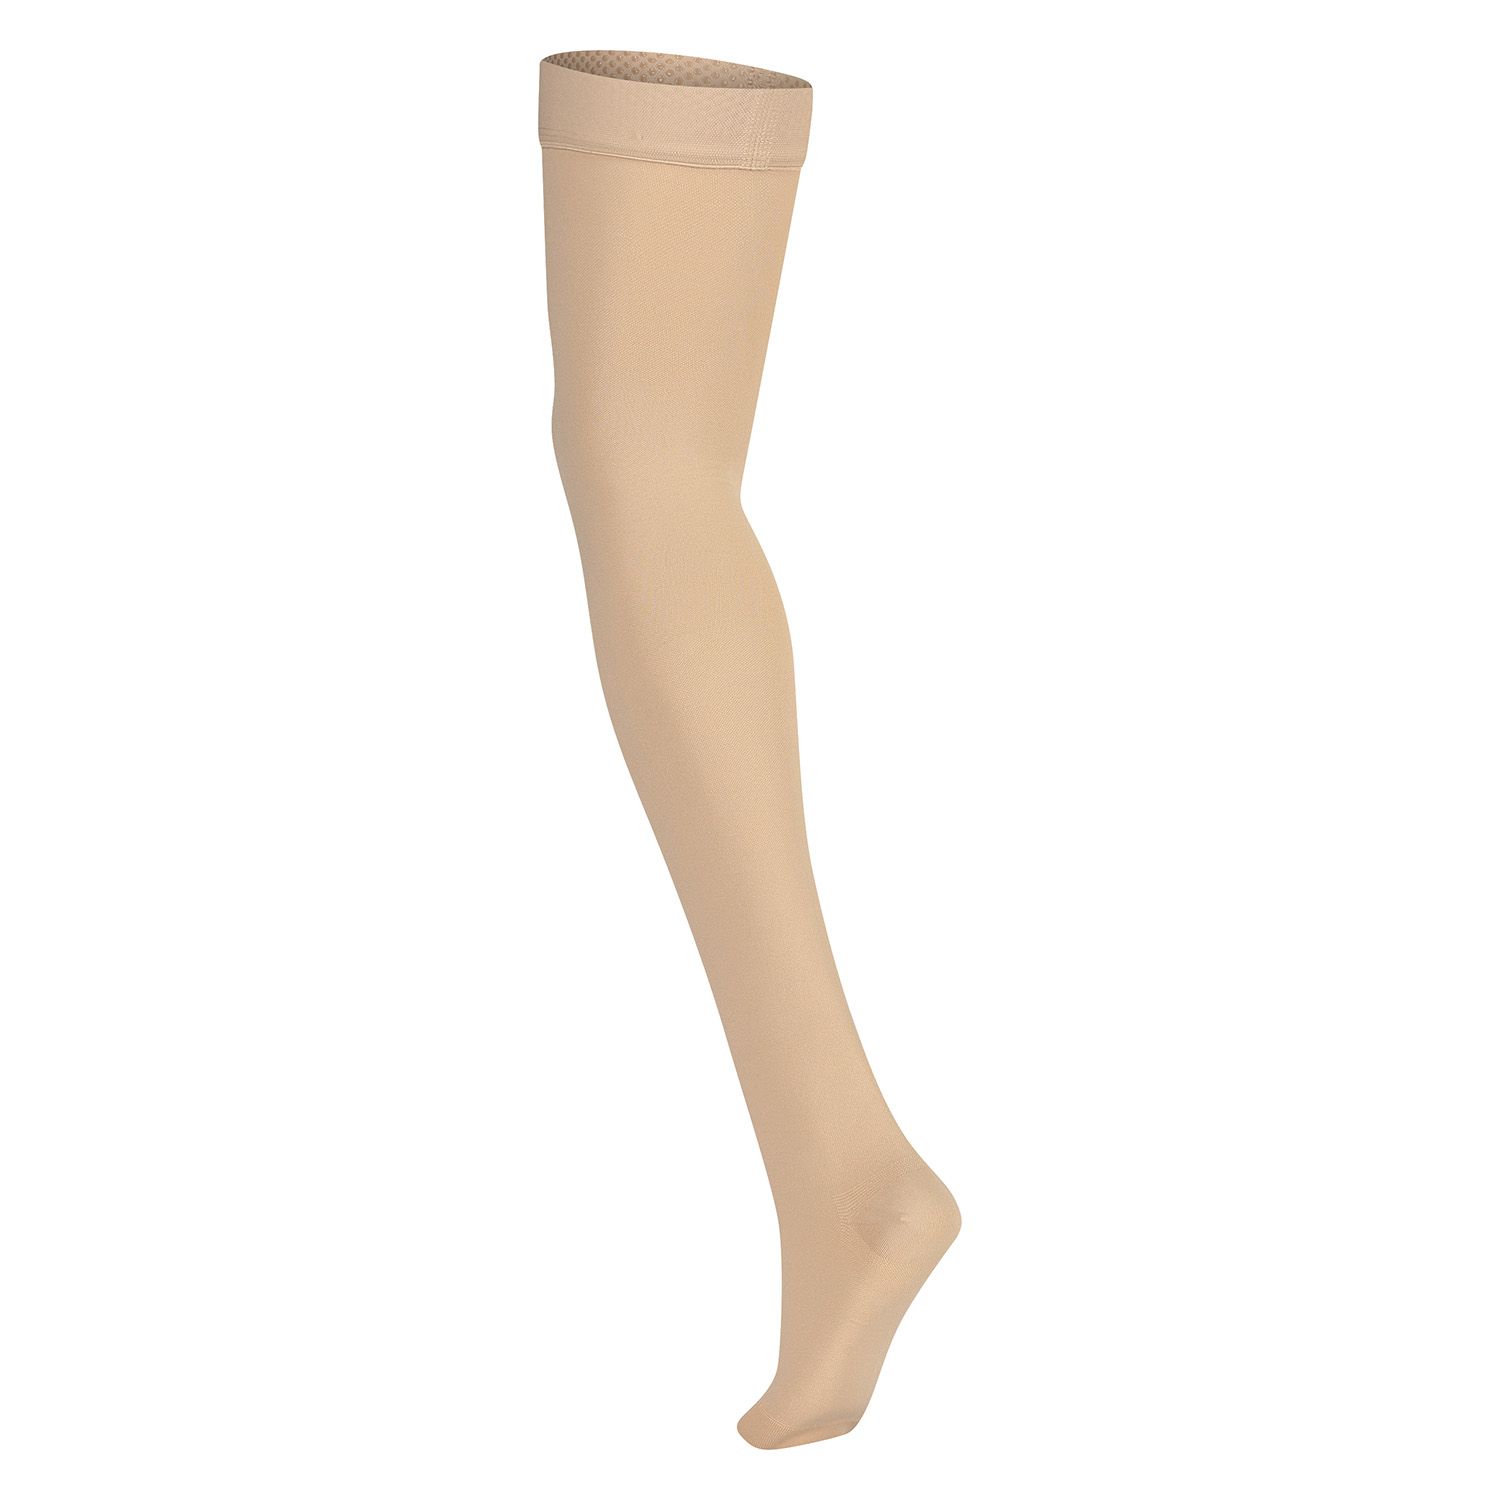 dunimed premium comfort compression stockings groin length open toe front view